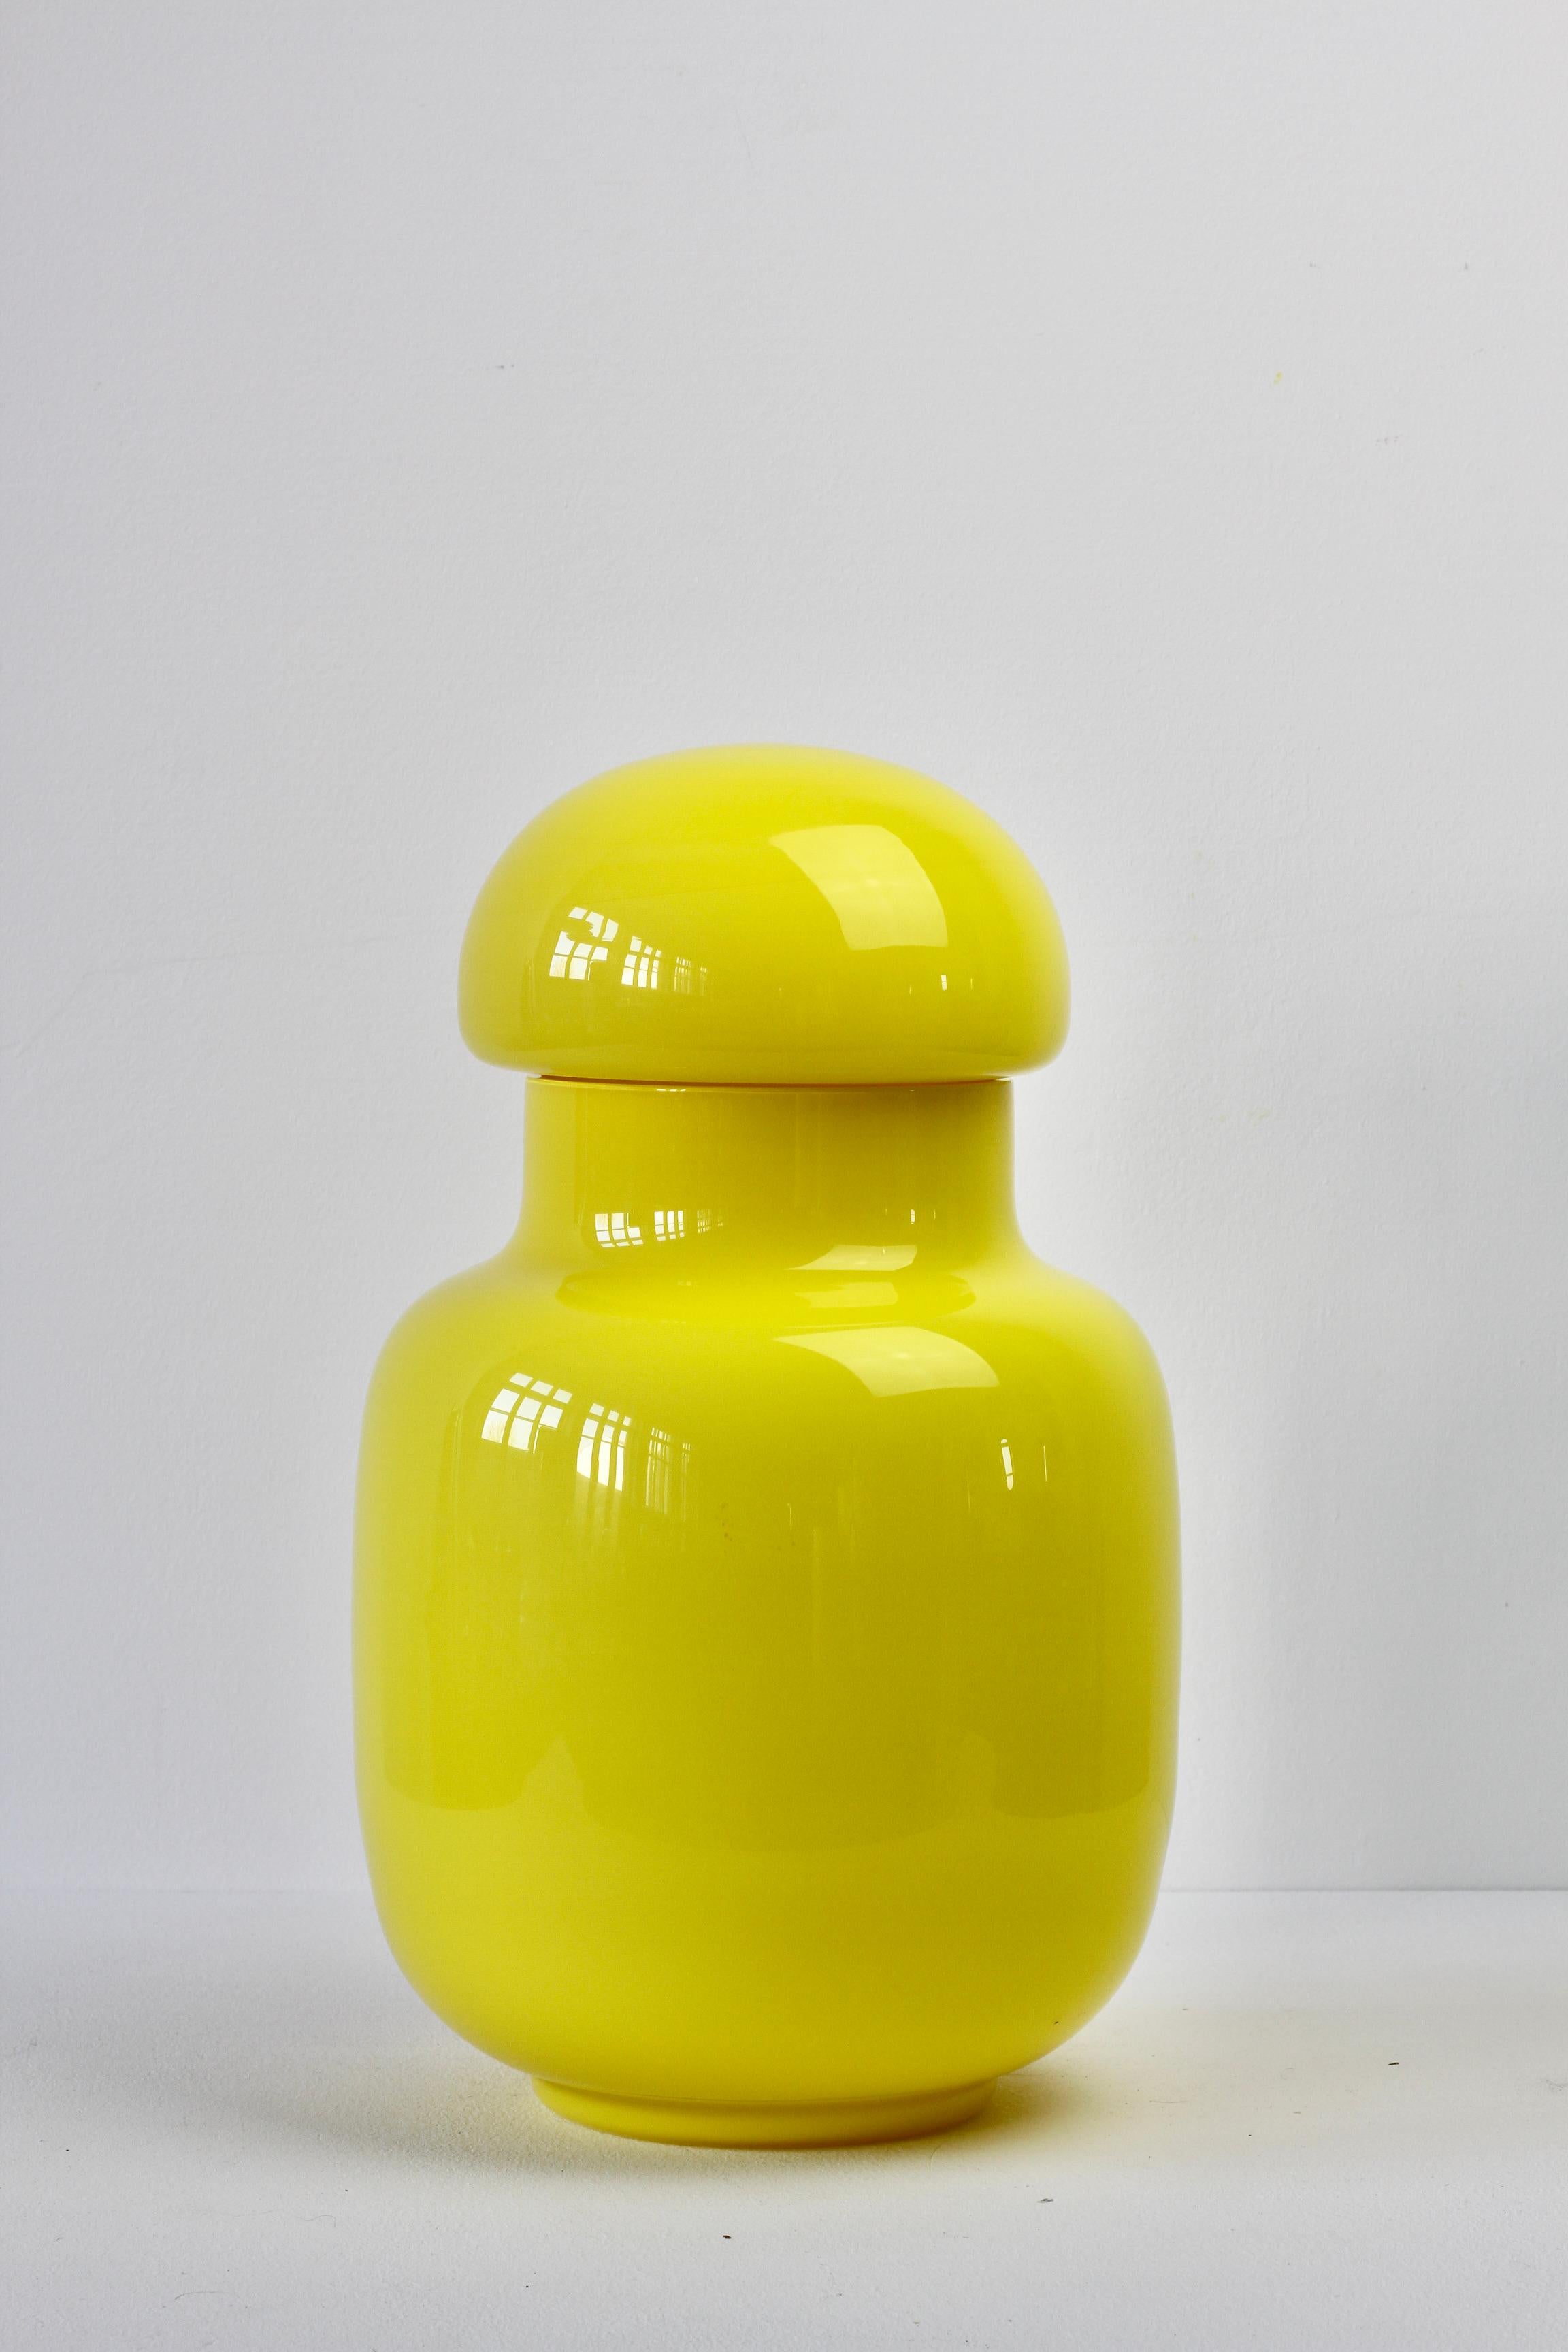 Cenedese large, tall and rare bright yellow vintage midcentury Murano lidded glass jar, vase or vessel, made in Venice, Italy, circa 1970-1990. Particularly striking is the form and large size, this vessel has all the characteristics of hand thrown